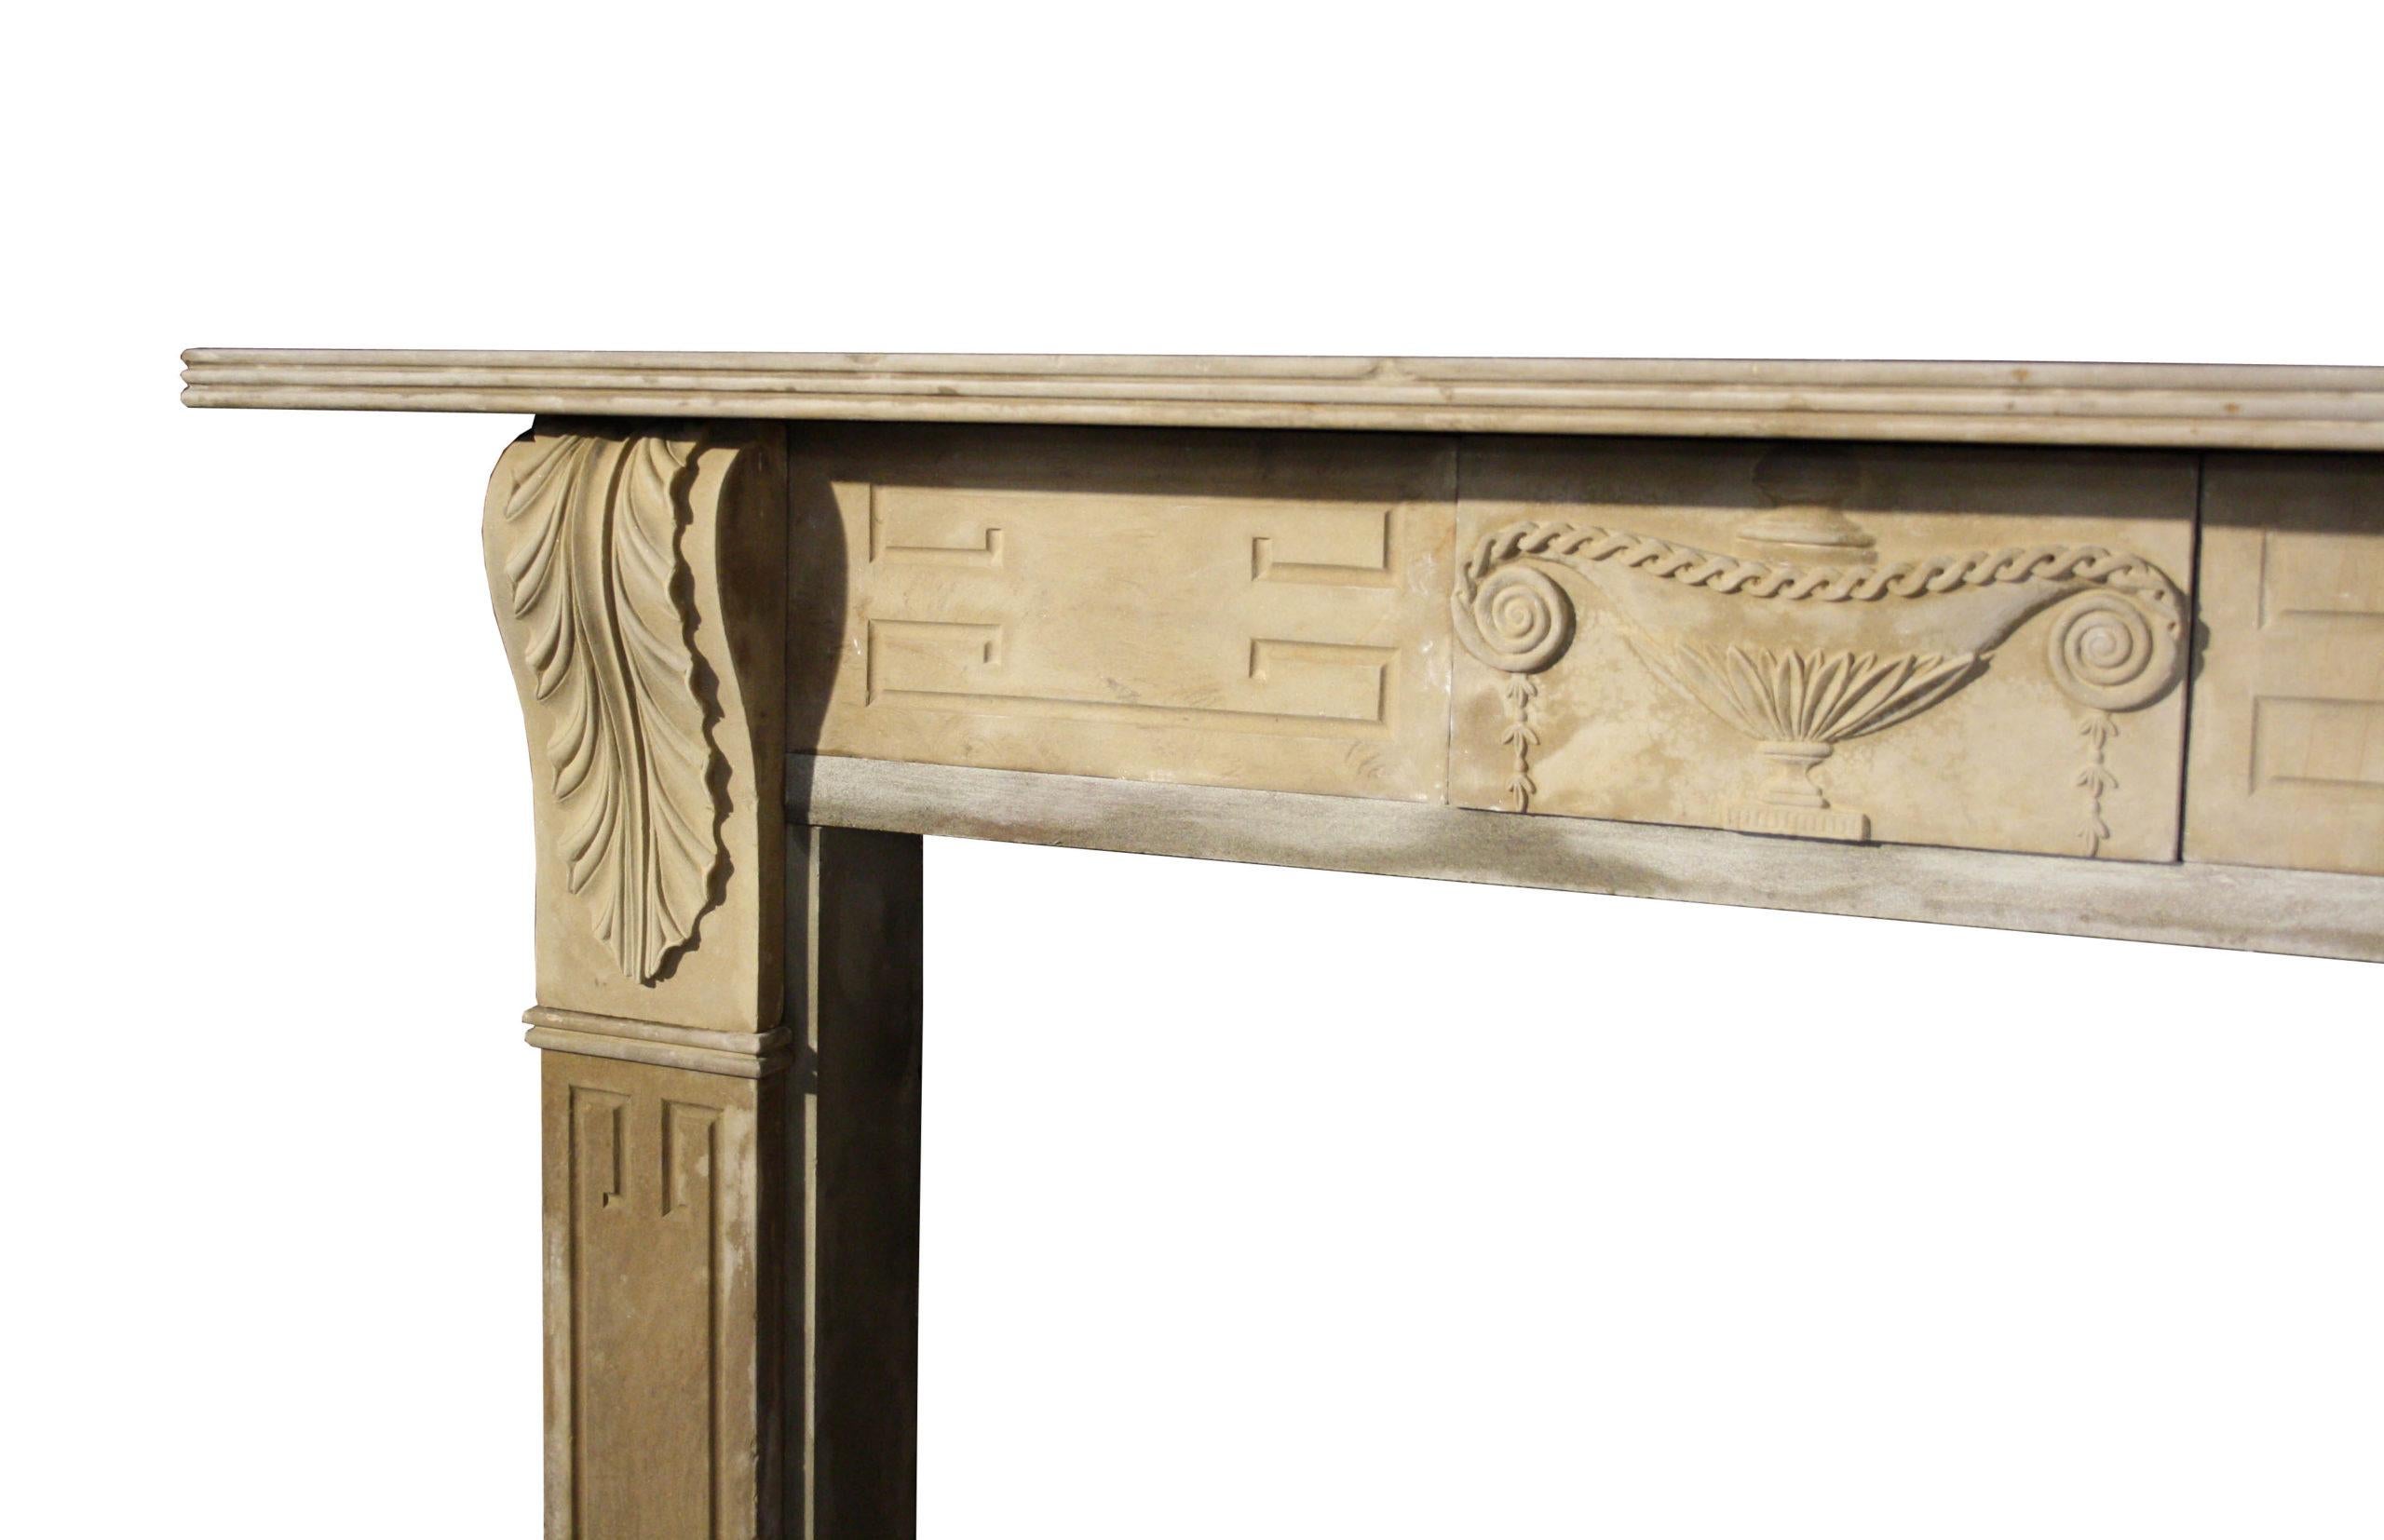 A well proportioned English Regency stone fire surround. The jambs with Greek key panels surmounted by carved brackets of classical form. The frieze carved with carved classical urn to centre above a reeded shelf. First quarter of the 19th